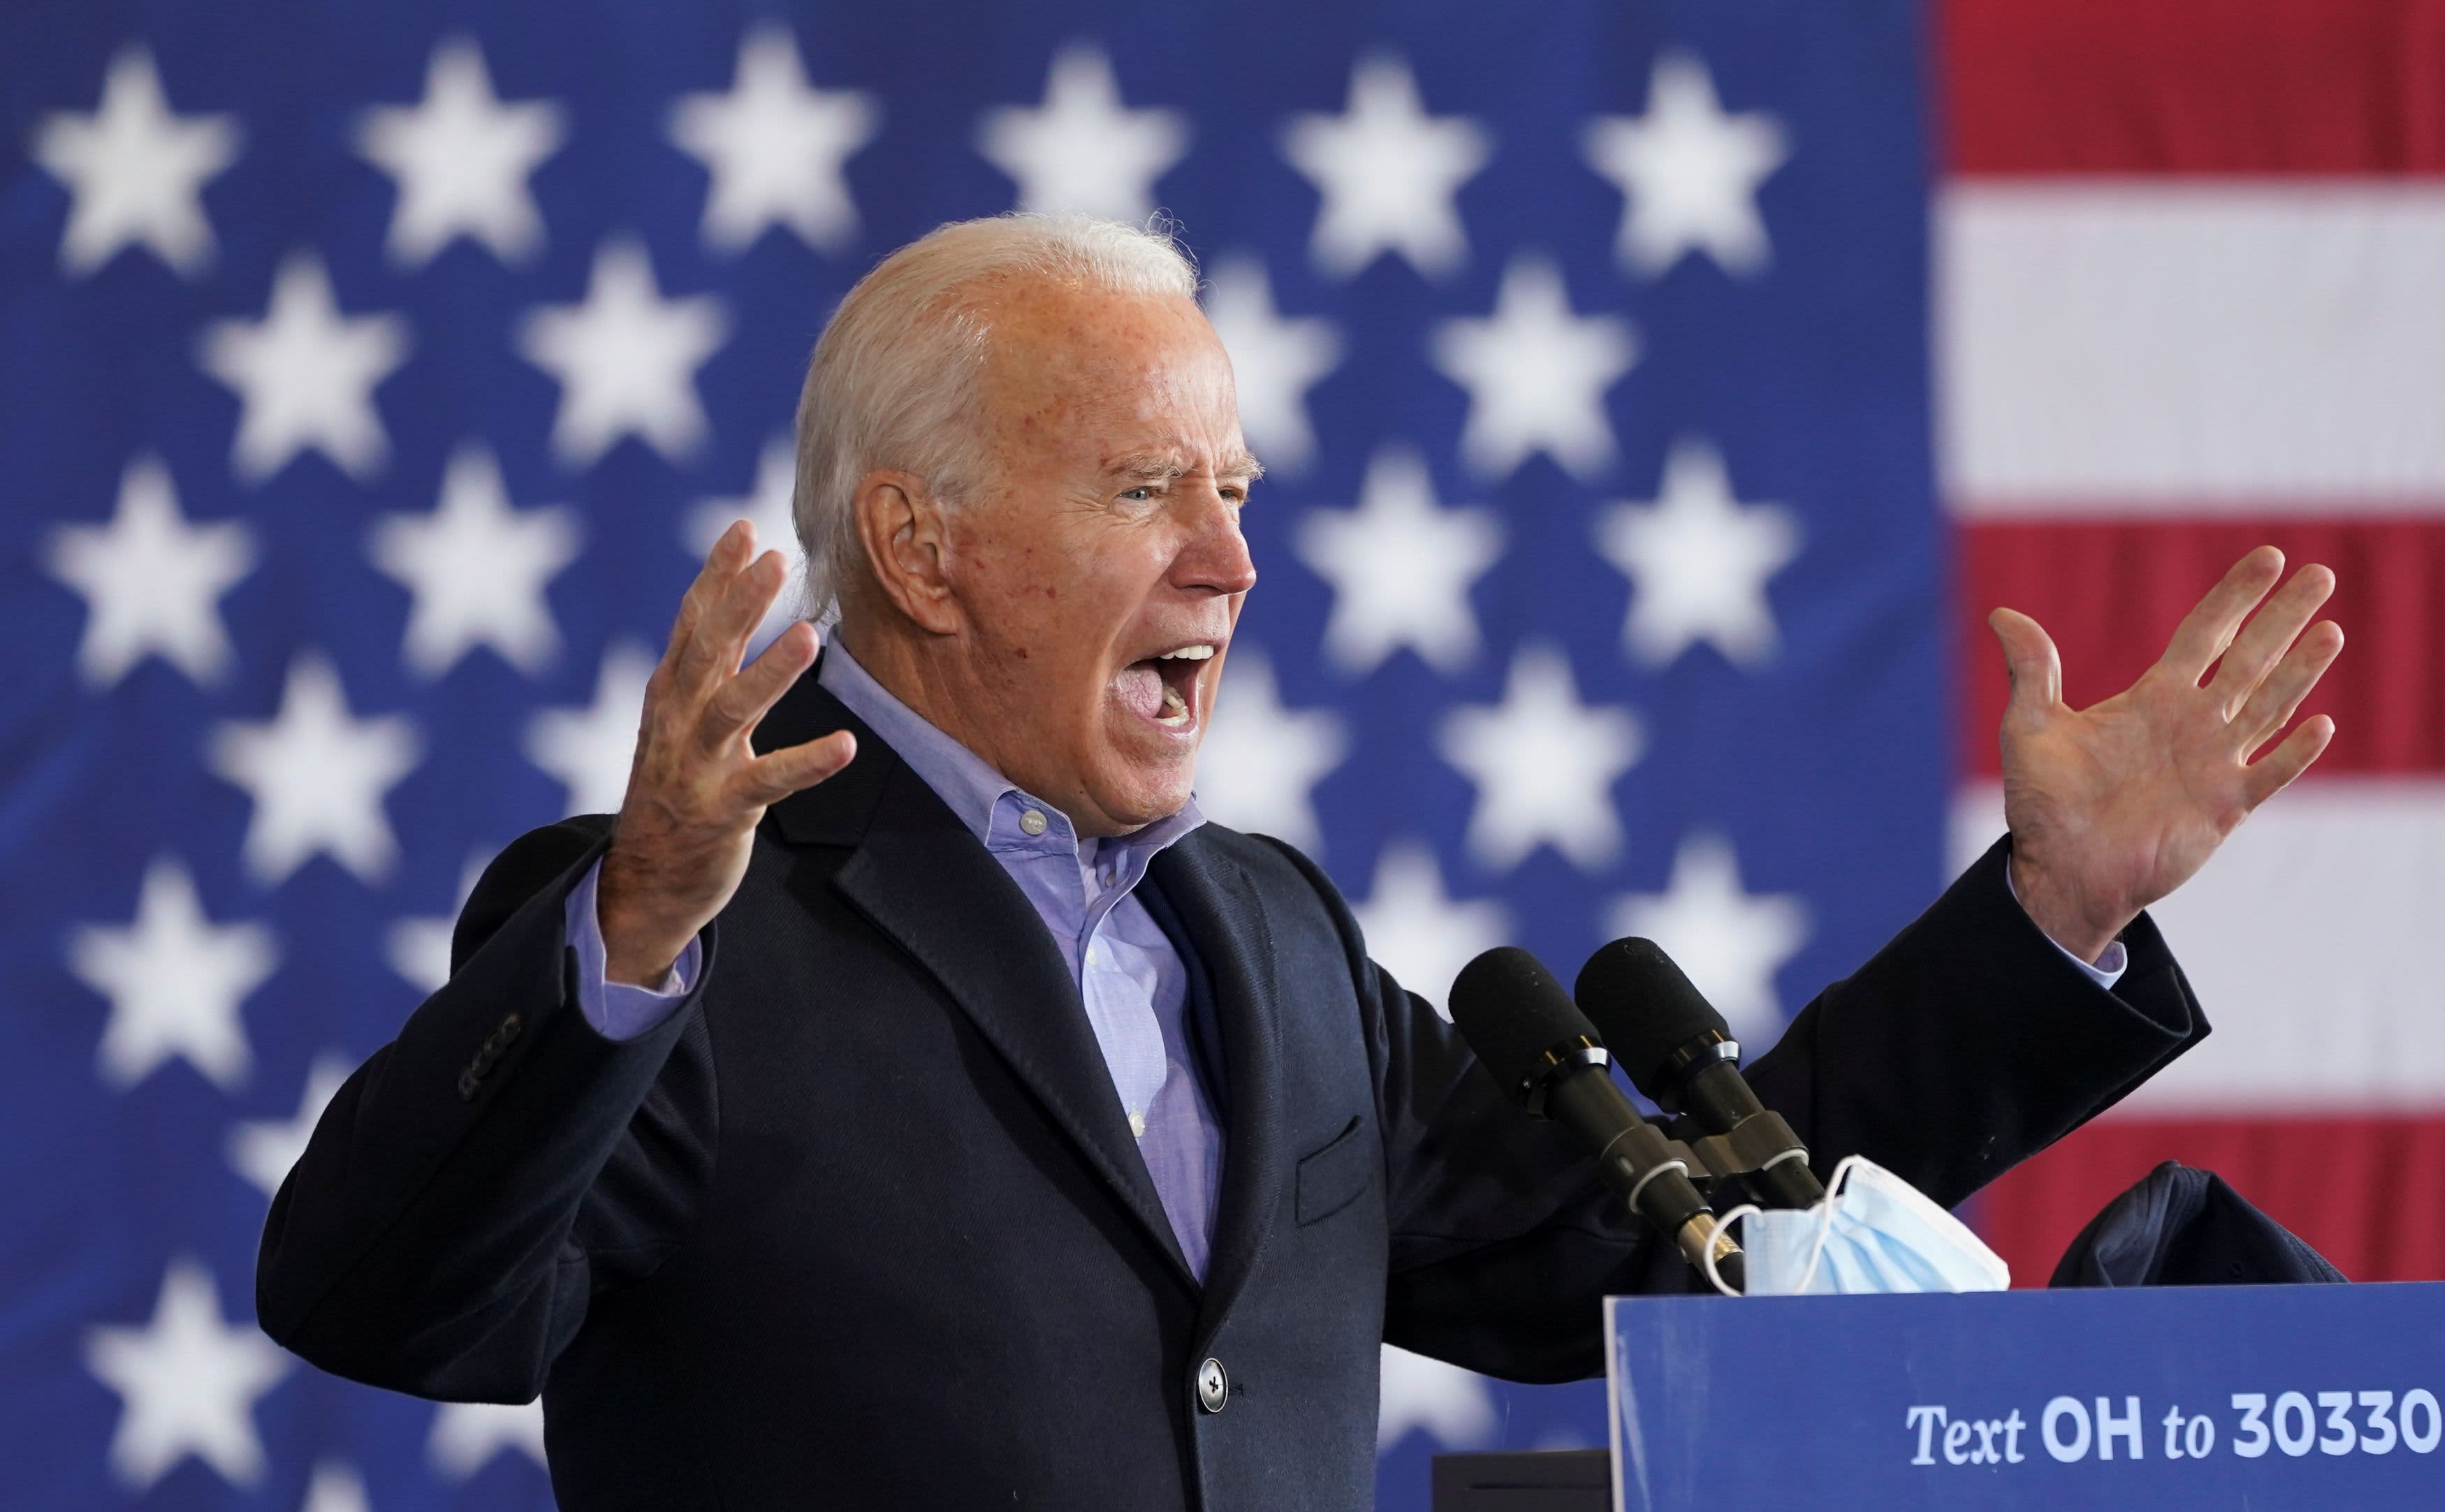 biden-energy-plan-may-be-more-similar-to-trump-policy-than-expected